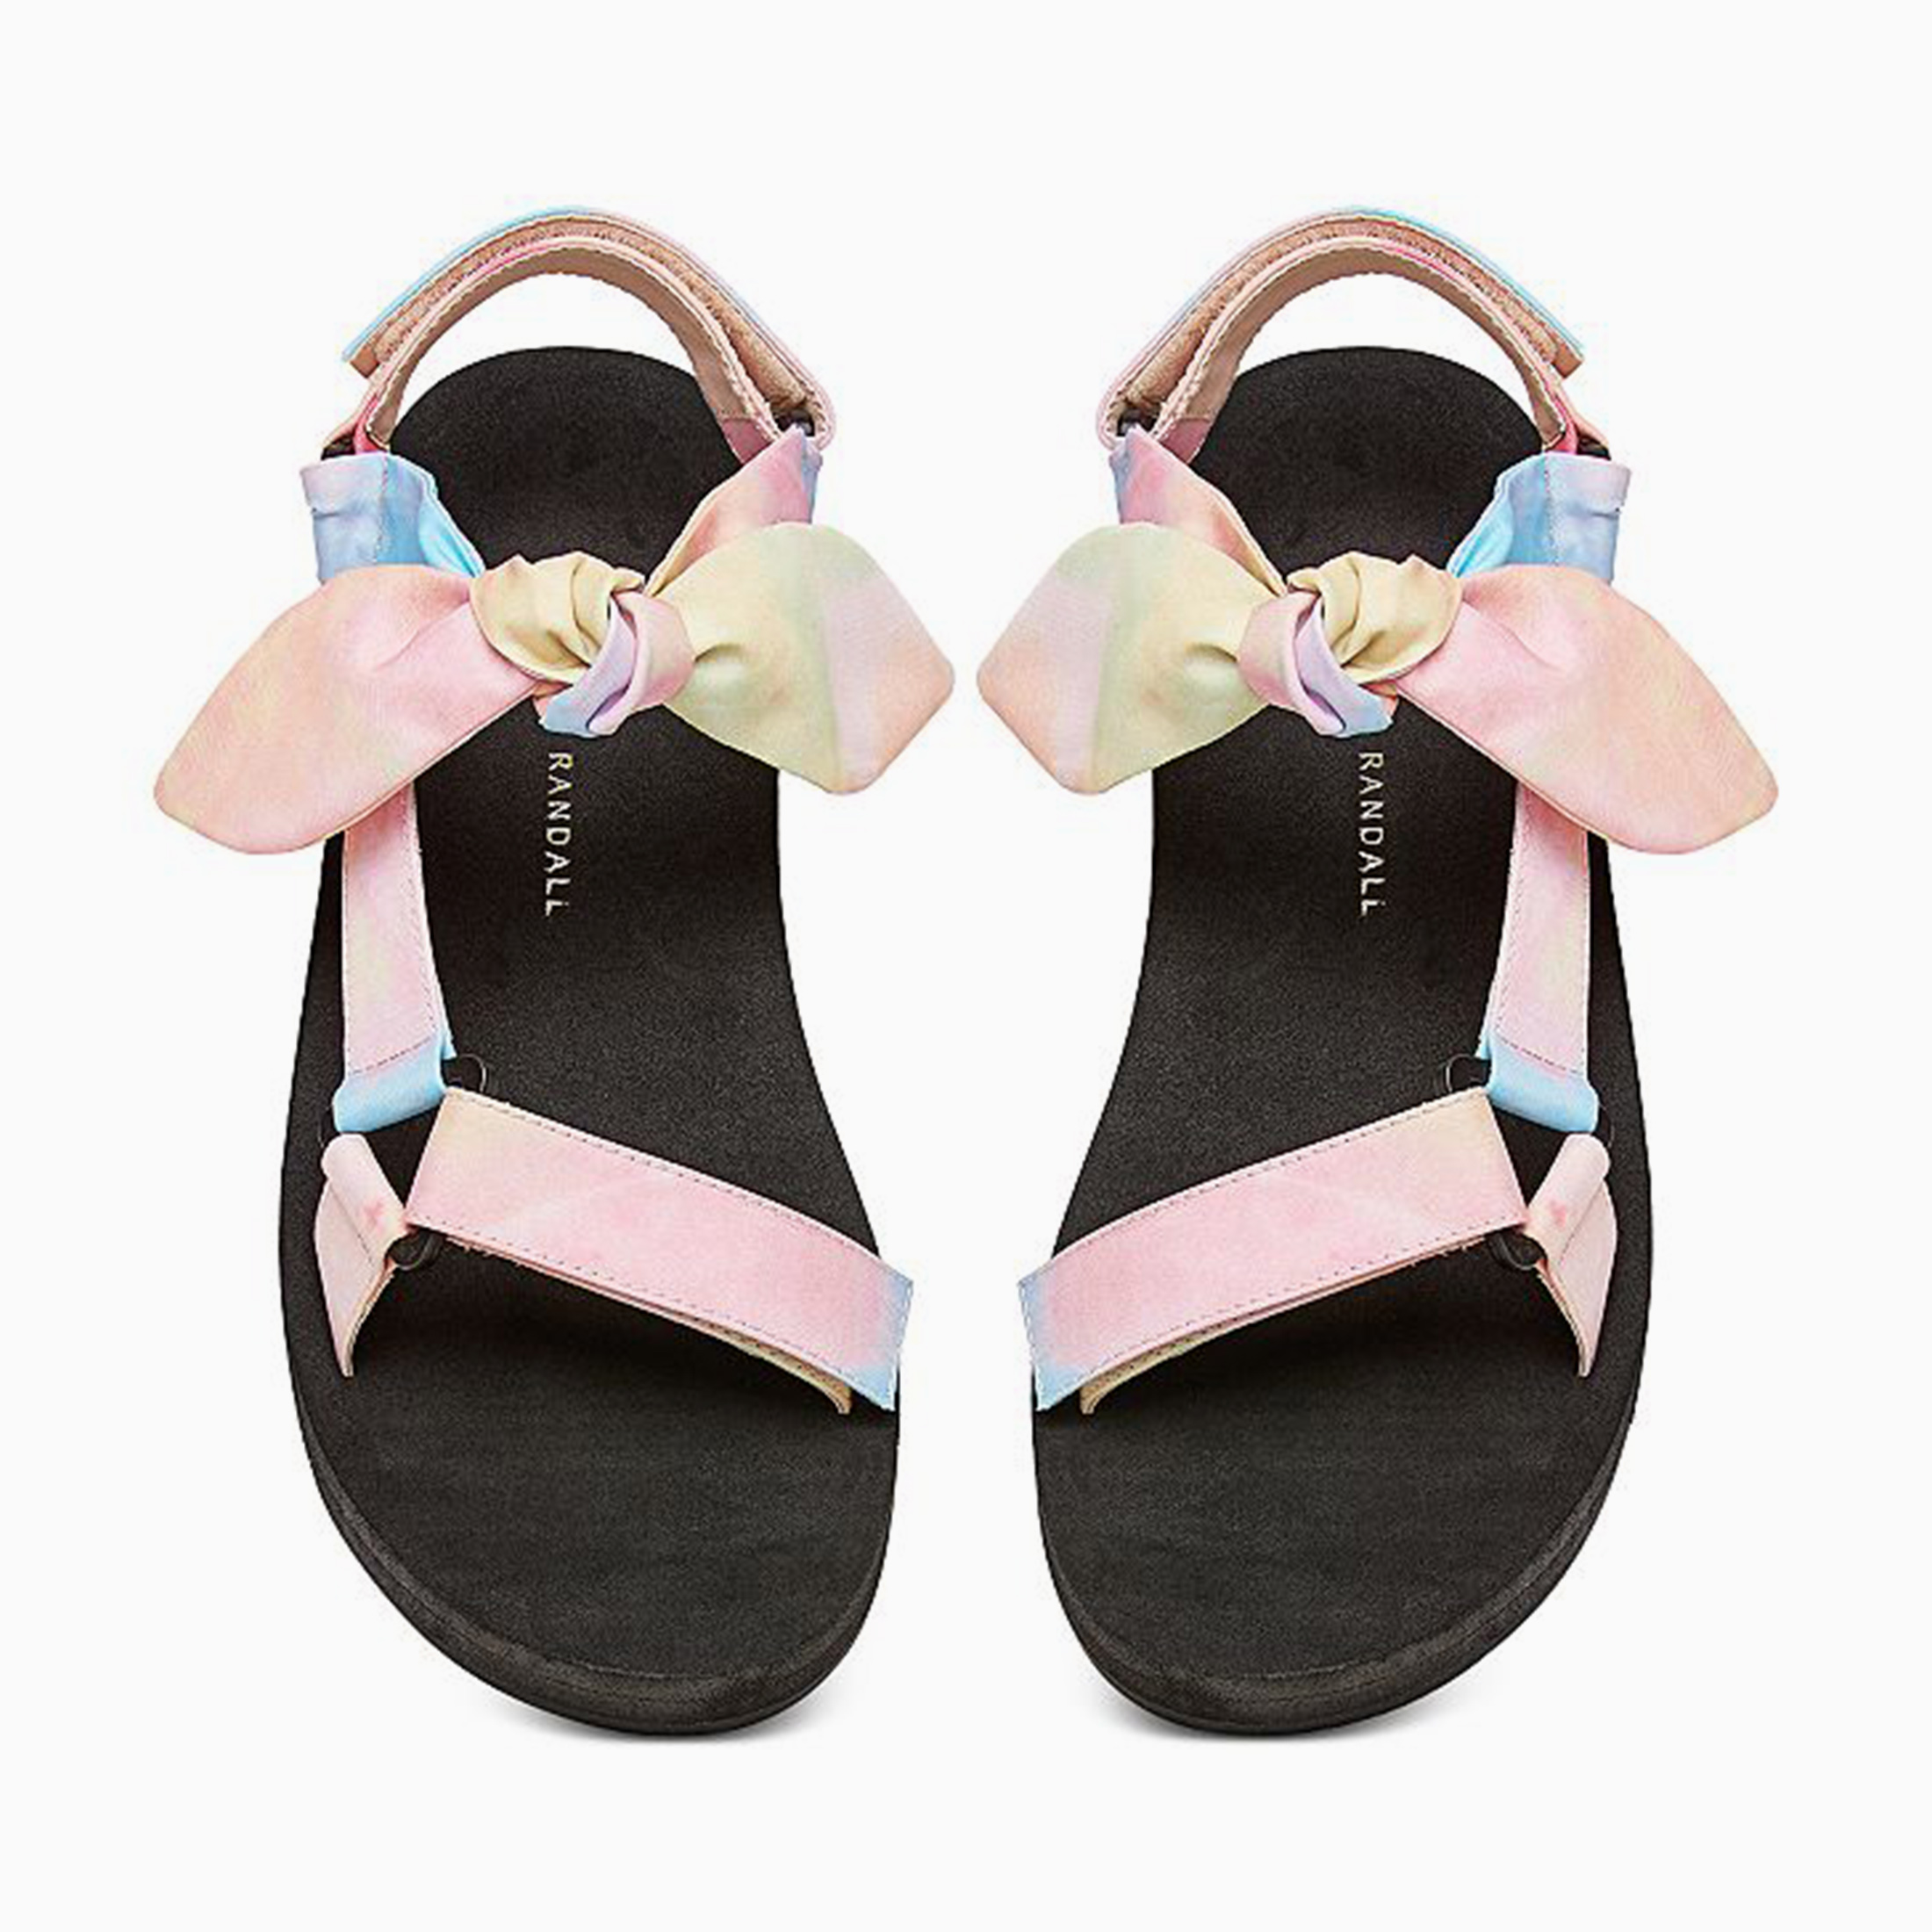 10 Ugly Sandals Inspired by Chanel